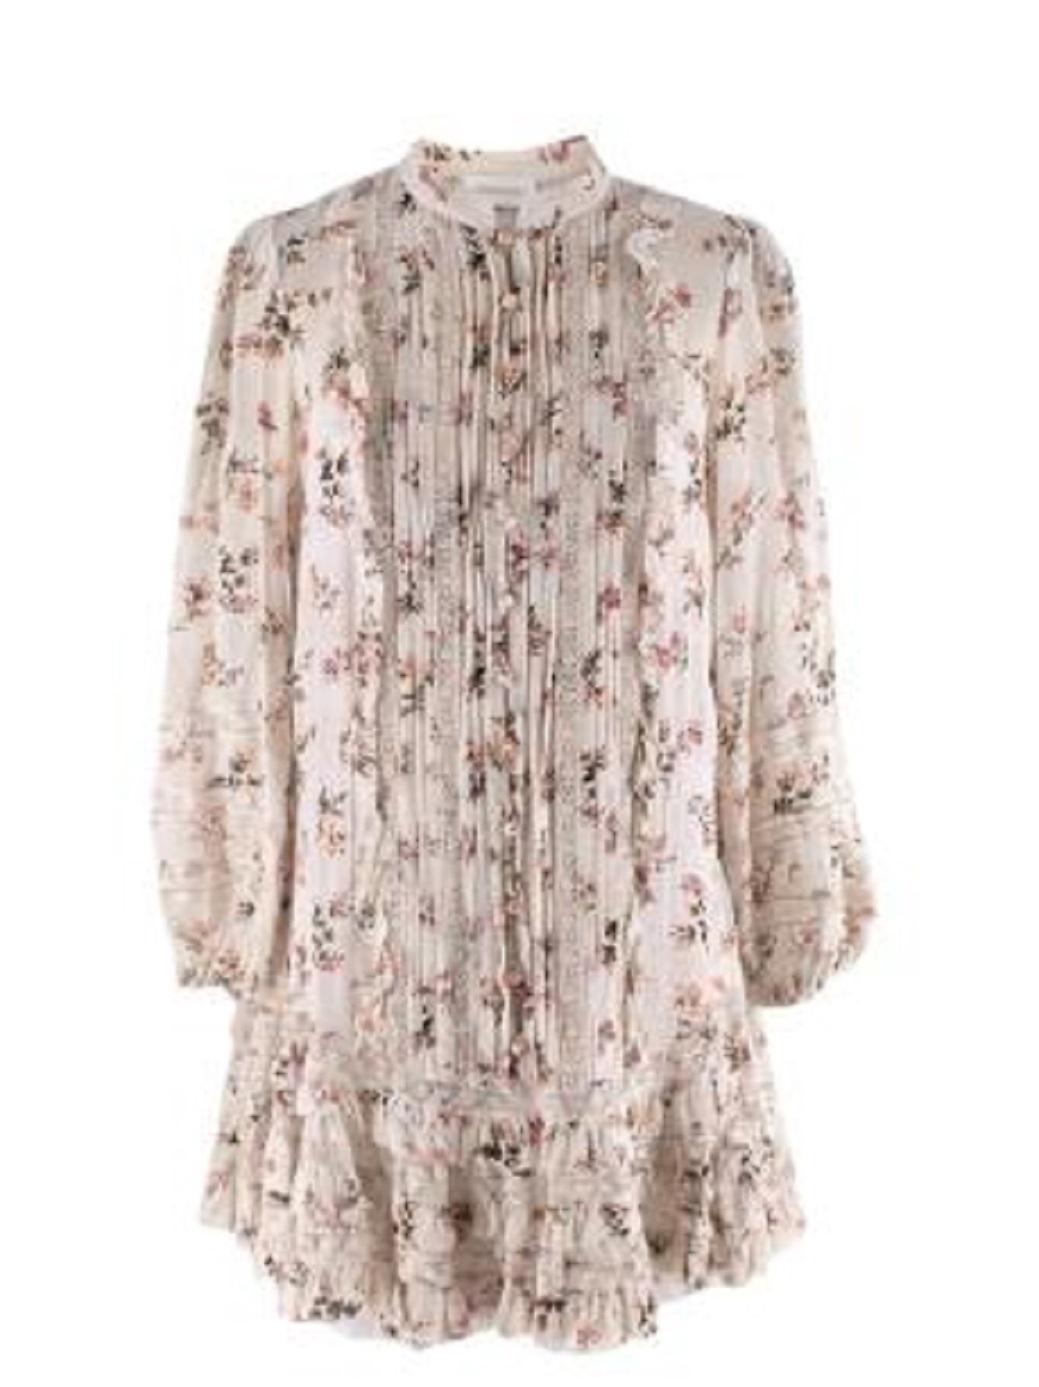 Zimmermann Ivory Floral Chiffon Drop Waist Short Dress

- Lightweight, slightly sheer floral chiffon dress
- Short flippy ruffled hemline, drop-waist silhouette
- Pinktucked, button front bodice and small stand collar
- Long sleeve, button finished